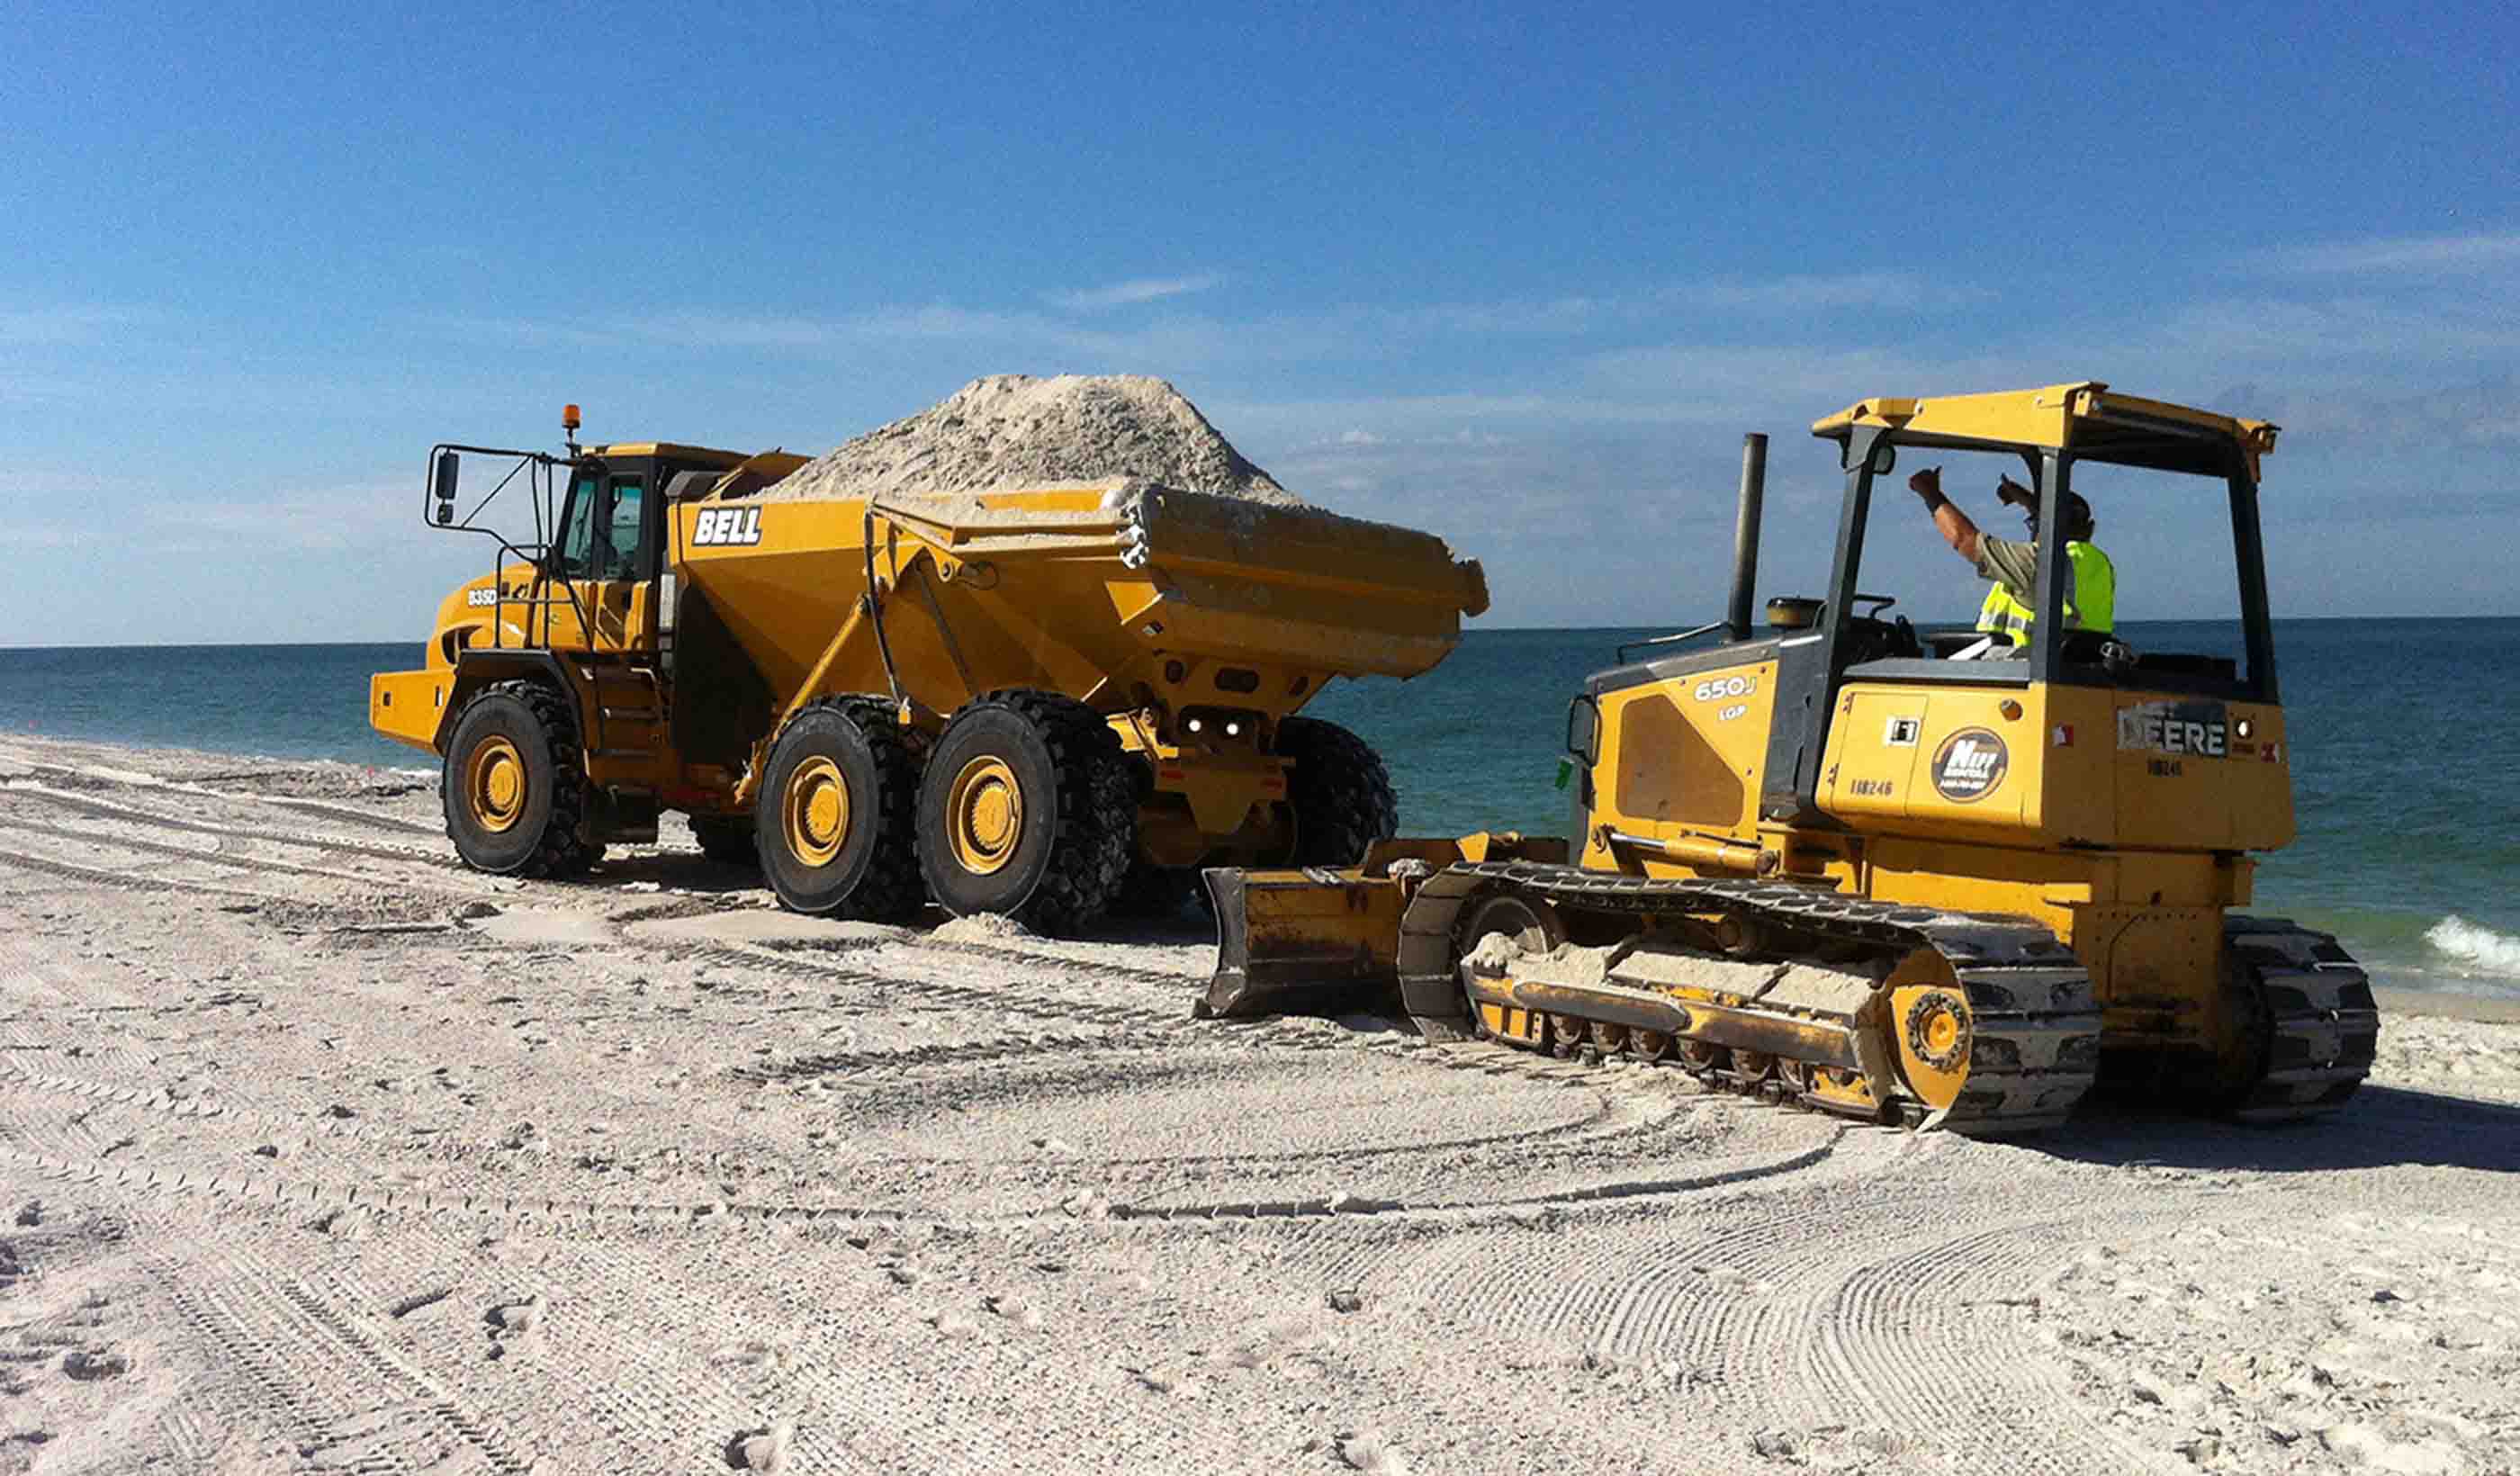 Coastal crisis: We’re running out of sand along Florida’s beaches—what’s the solution?